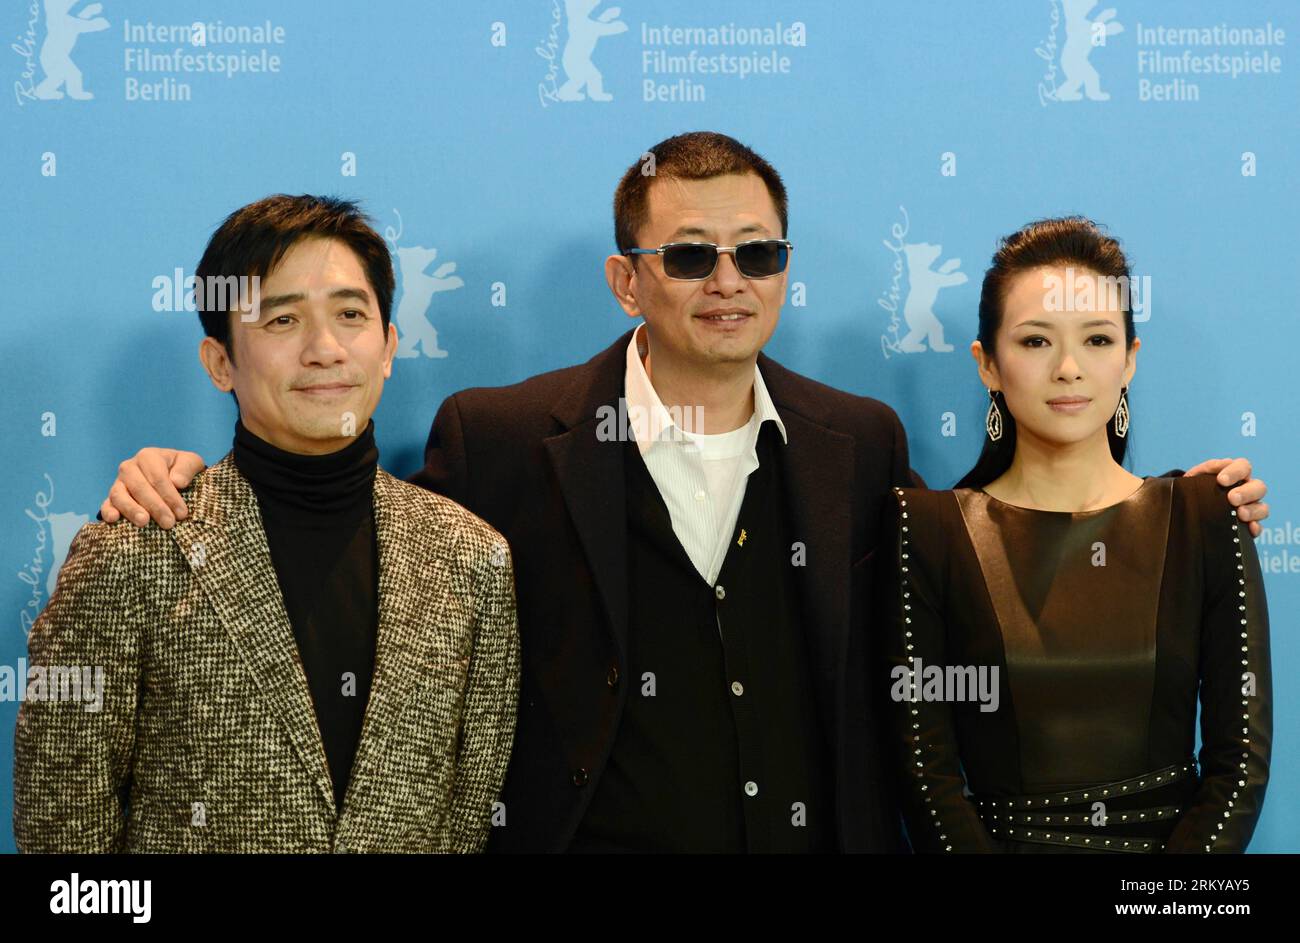 Bildnummer: 59190329  Datum: 07.02.2013  Copyright: imago/Xinhua (130208) -- BERLIN, Feb. 7, 2013 (Xinhua) -- Director Wong Kar Wai(C), actor Tony Leung (L) and actress Zhang Ziyi attend the photocall to promote the film The Grandmaster at the 63rd Berlinale film festival in Berlin, Germany, Feb. 7, 2013. The 63rd Berlinale film festival opens Thursday with a martial arts epic The grandmaster of Chinese director Wong Kar Wai who will also lead the jury of this Berlinale. (Xinhua/Ma Ning) (dzl) GERMANY-BERLIN-FILM FESTIVAL-THE GRANDMASTER PUBLICATIONxNOTxINxCHN Kultur Entertainment People Film Stock Photo